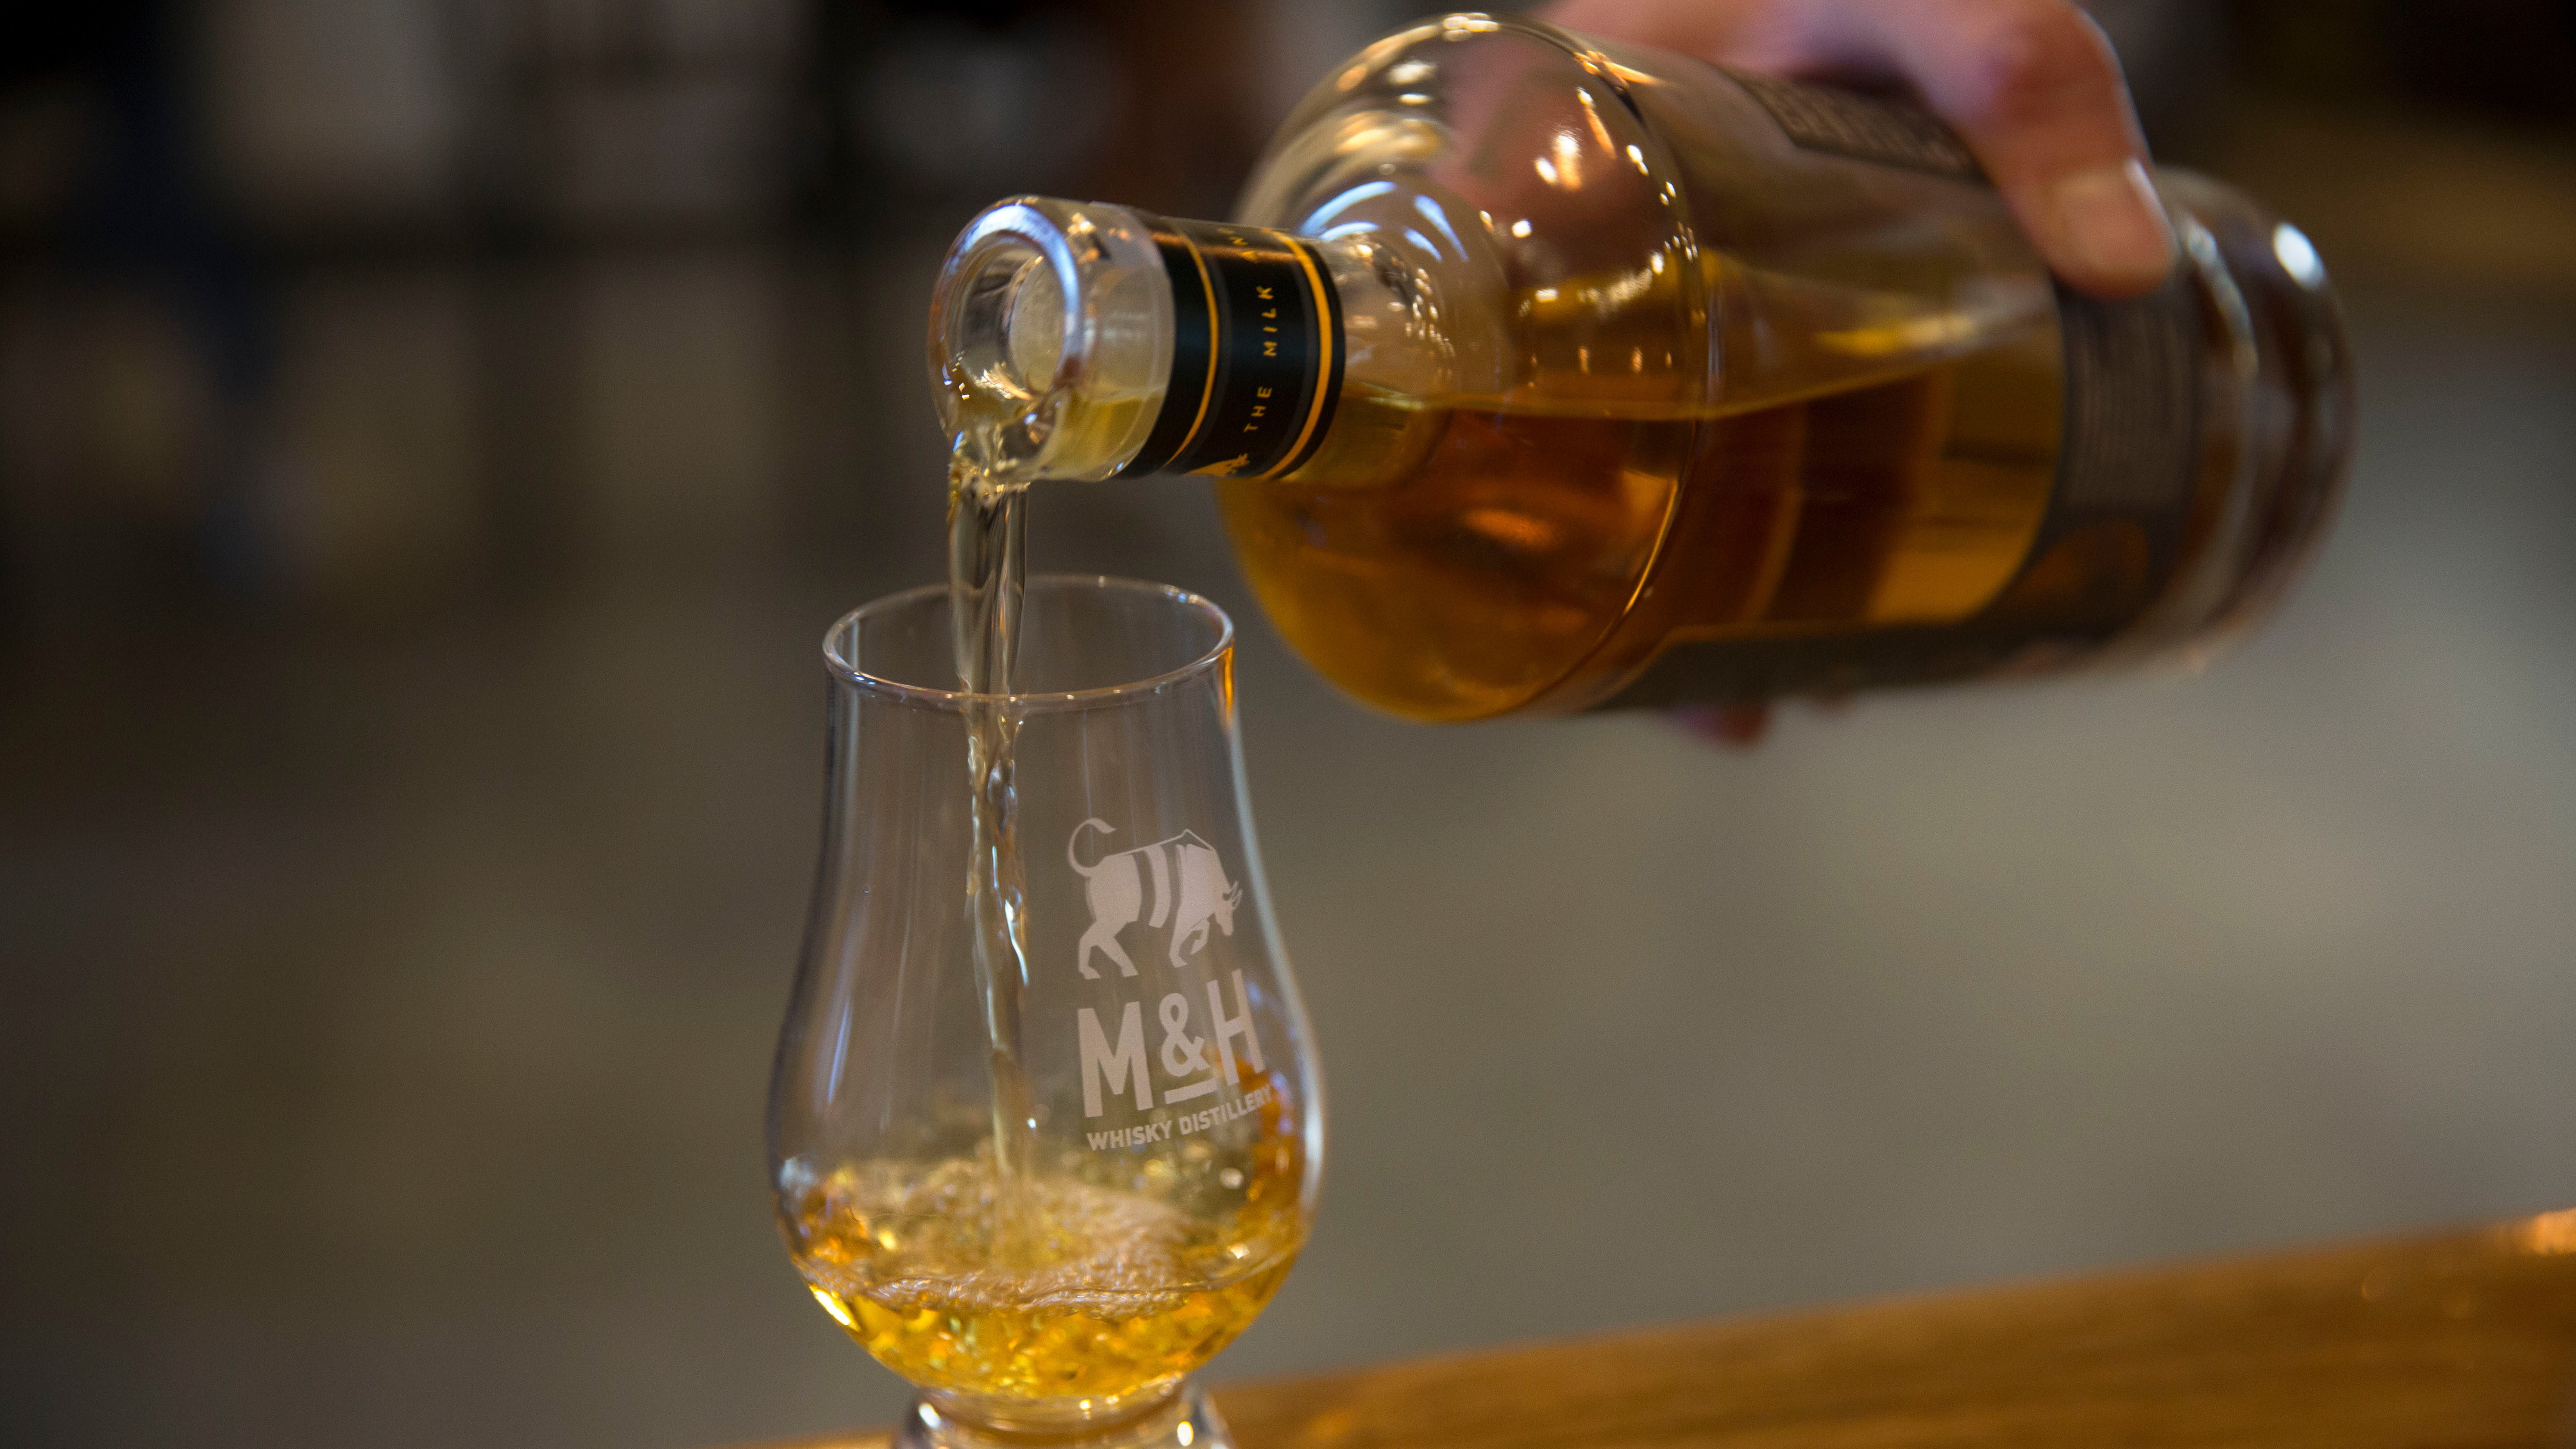 Water really does give a whisky nip some zip, Swedish scientists prove